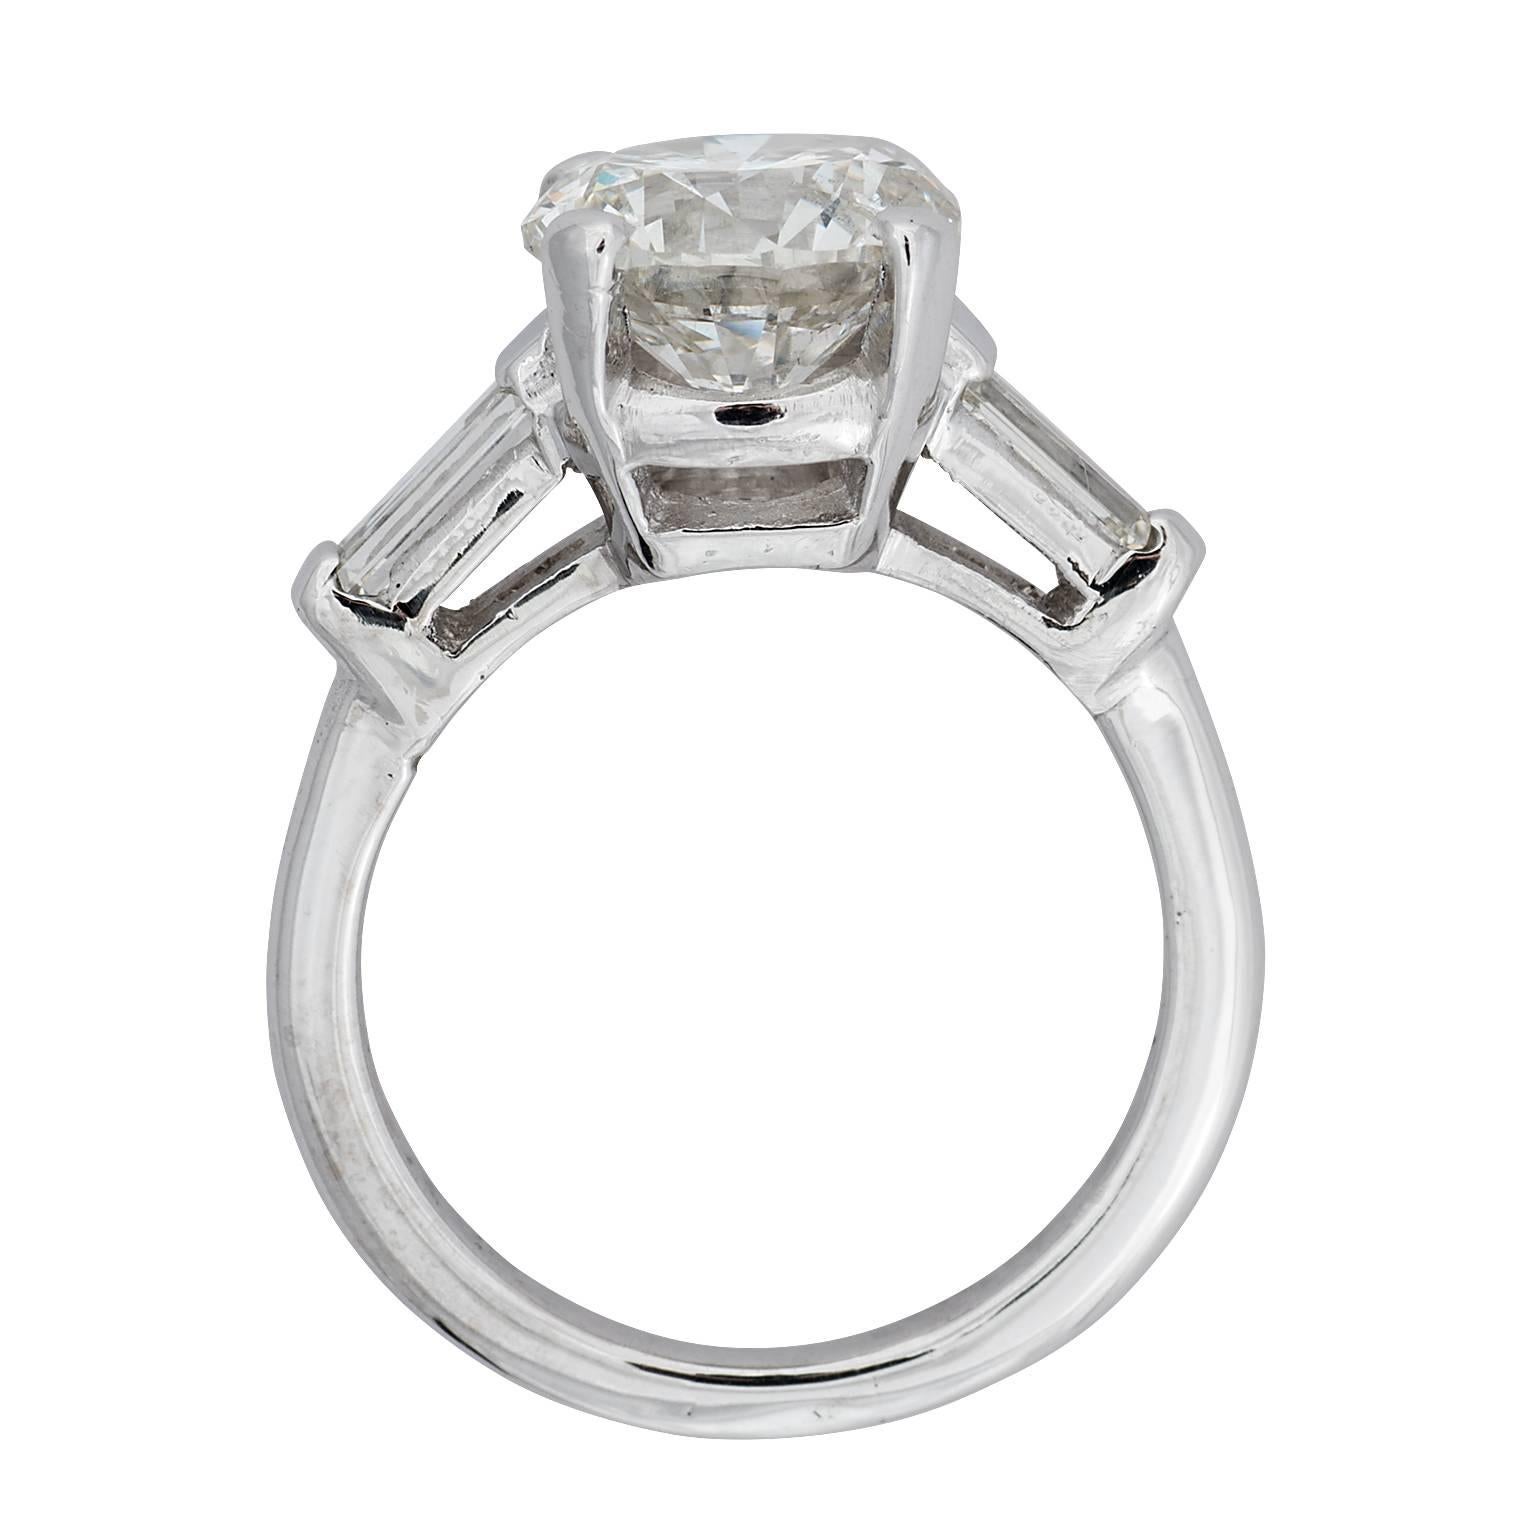 3.11 carat round brilliant diamond and baguette diamond platinum ring.  The 3.11 carat round brilliant is set in a four prong basket, graded by GIA as a J color, I1 clarity.  the baguette diamonds have a total weight of 0.40 carats and are graded as